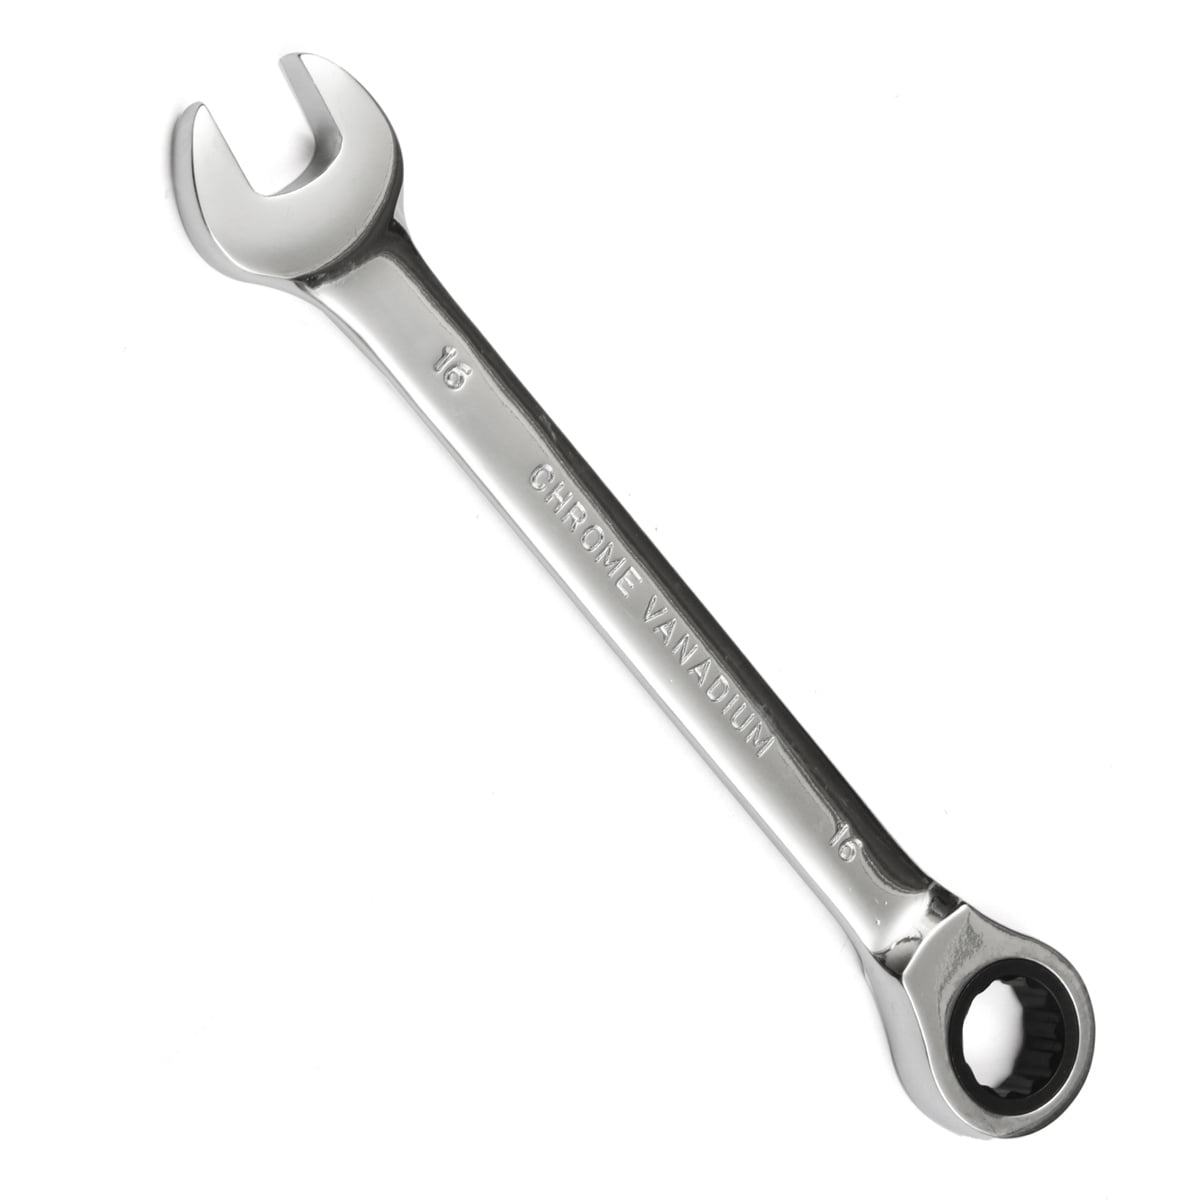 6mm-32mm Steel Metric Fixed Head Ratchet Spanner Gear Wrench Open End & Ring